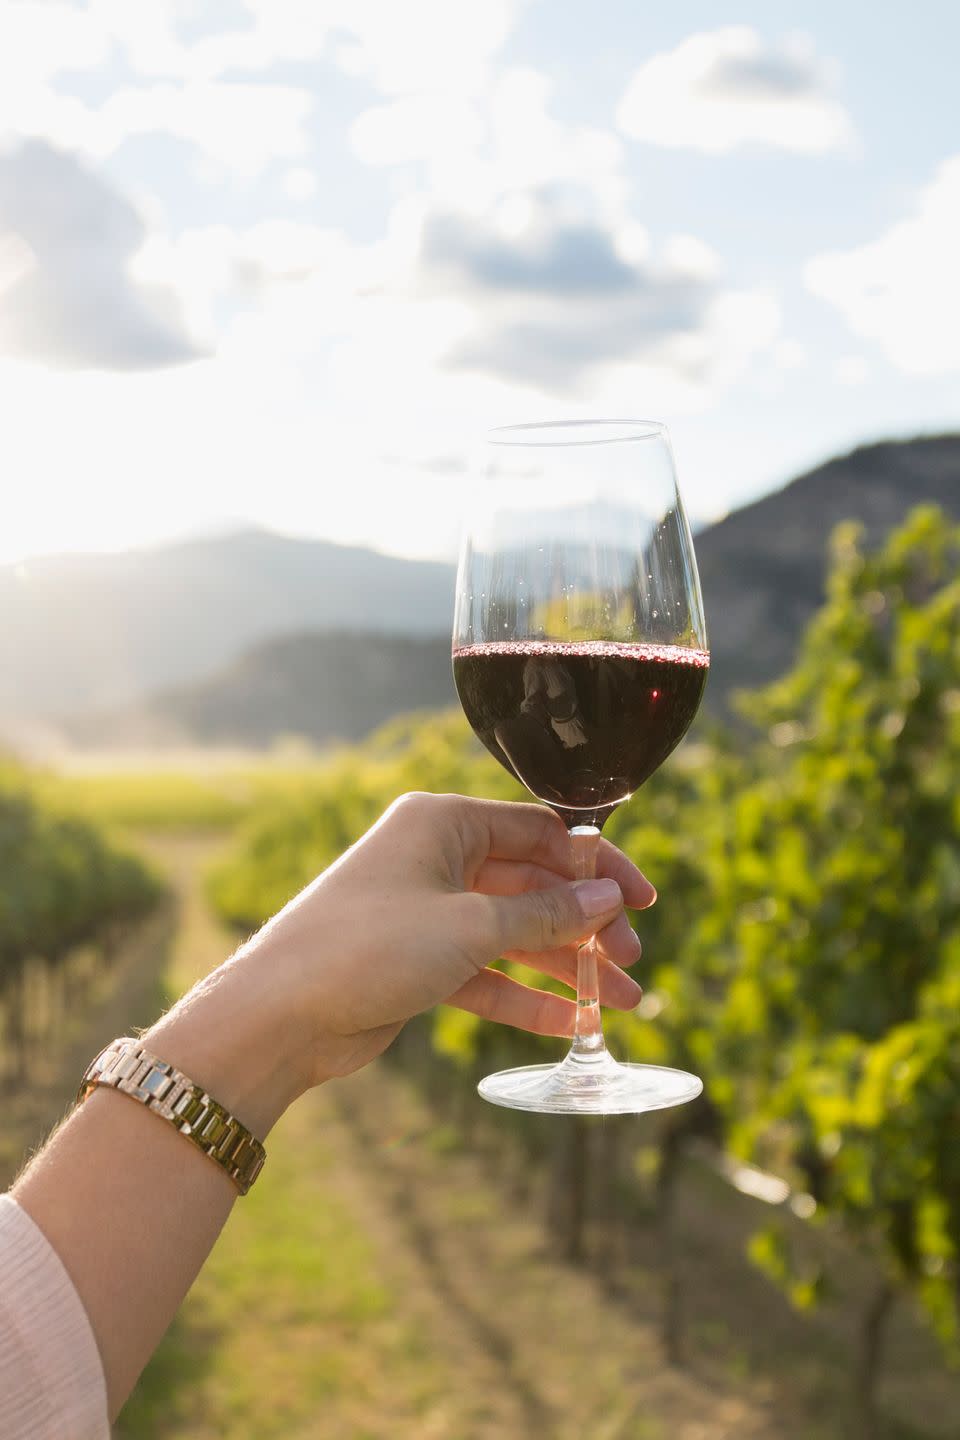 <p>Yup, I hate to break it to you, but red wine is pretty much the worst drink for your skin... </p><p>"Alcohol is a vasodilator, meaning it promotes the opening of blood vessels in the skin, which is how it leads to increased redness. Red wine is one of the worst culprits, as it’s also a histamine releaser which again promotes redness and flushing." Says Dr Sam. </p><p>"This makes it the worst drink, particularly if you're prone to redness or with rosacea."</p>